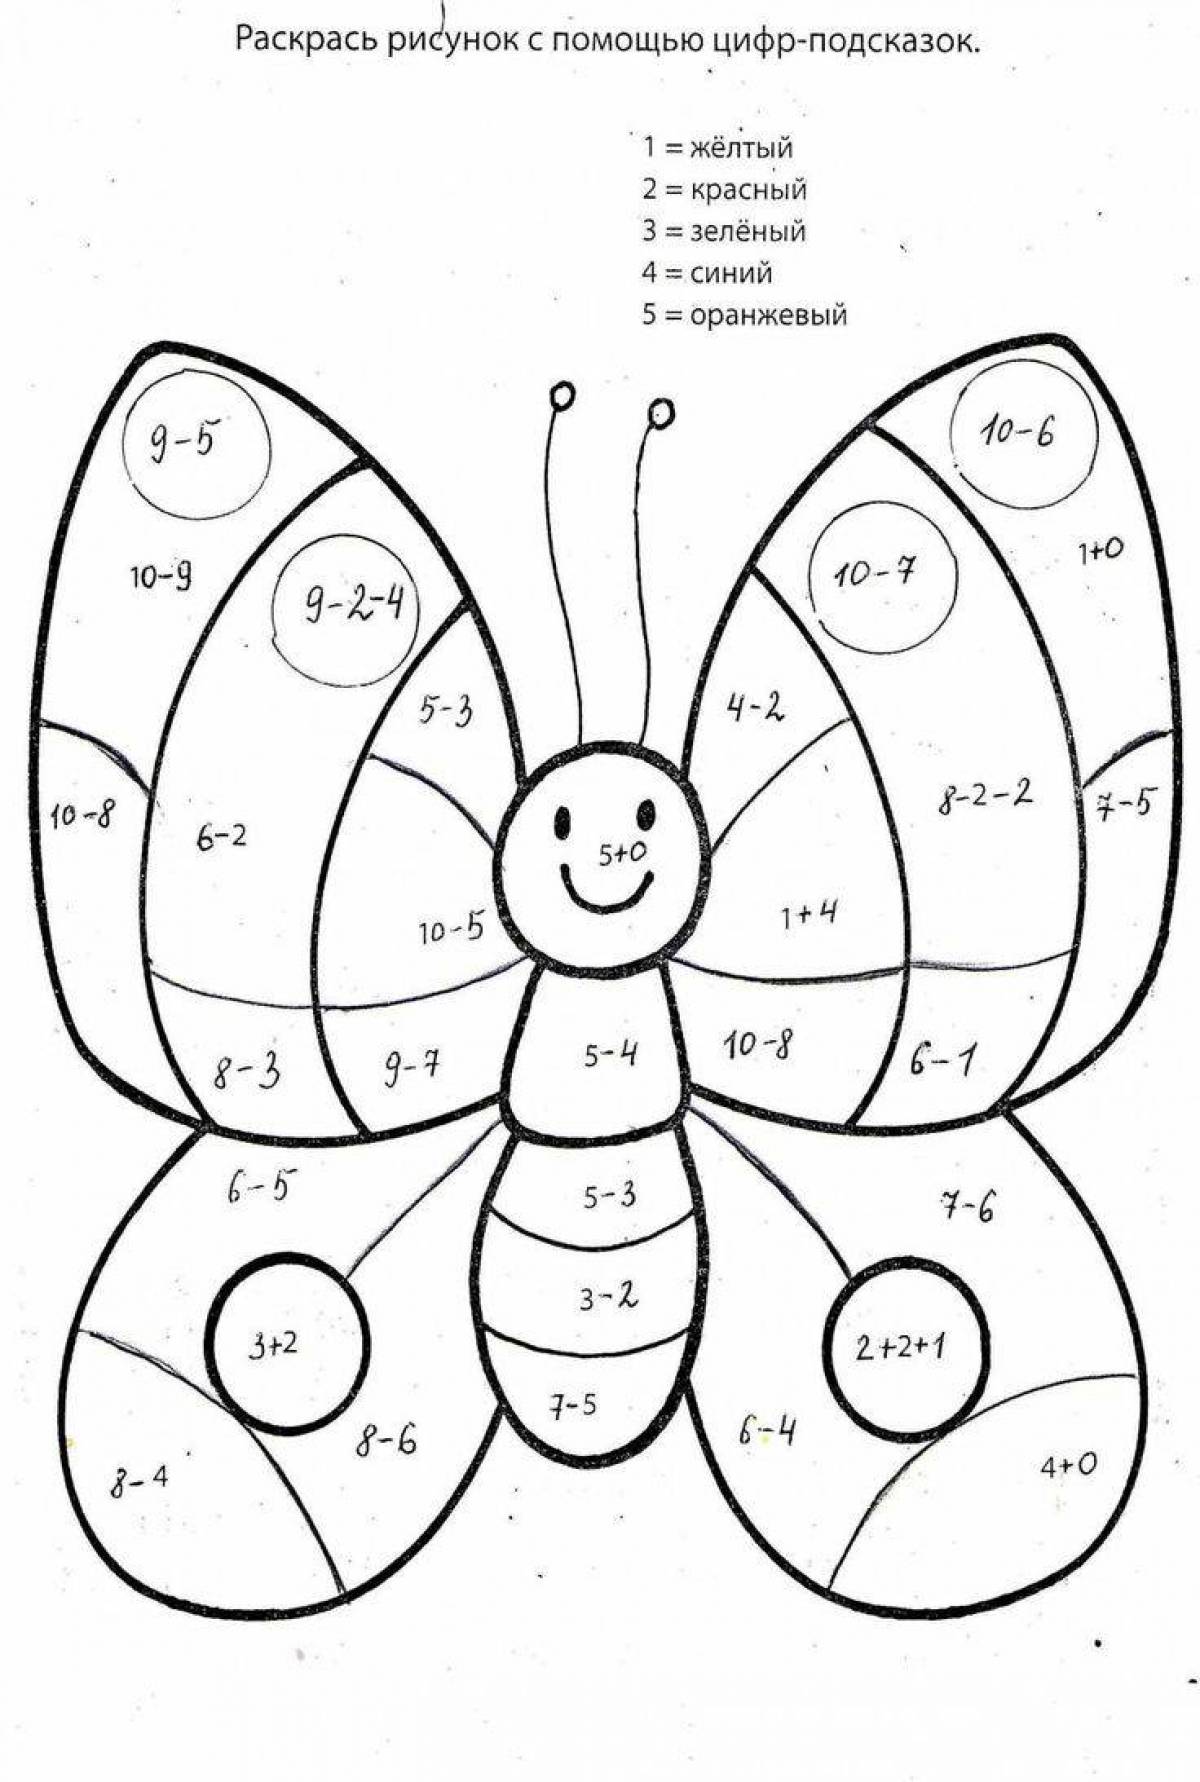 Fun counting within 10 coloring pages